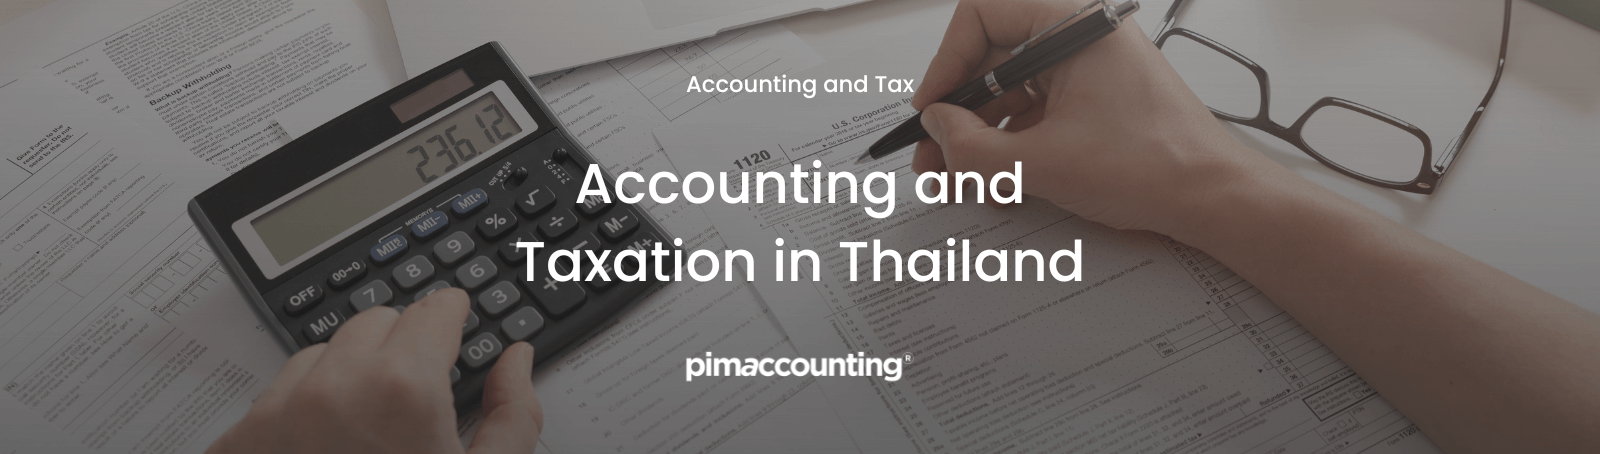 Accounting and Taxation in Thailand